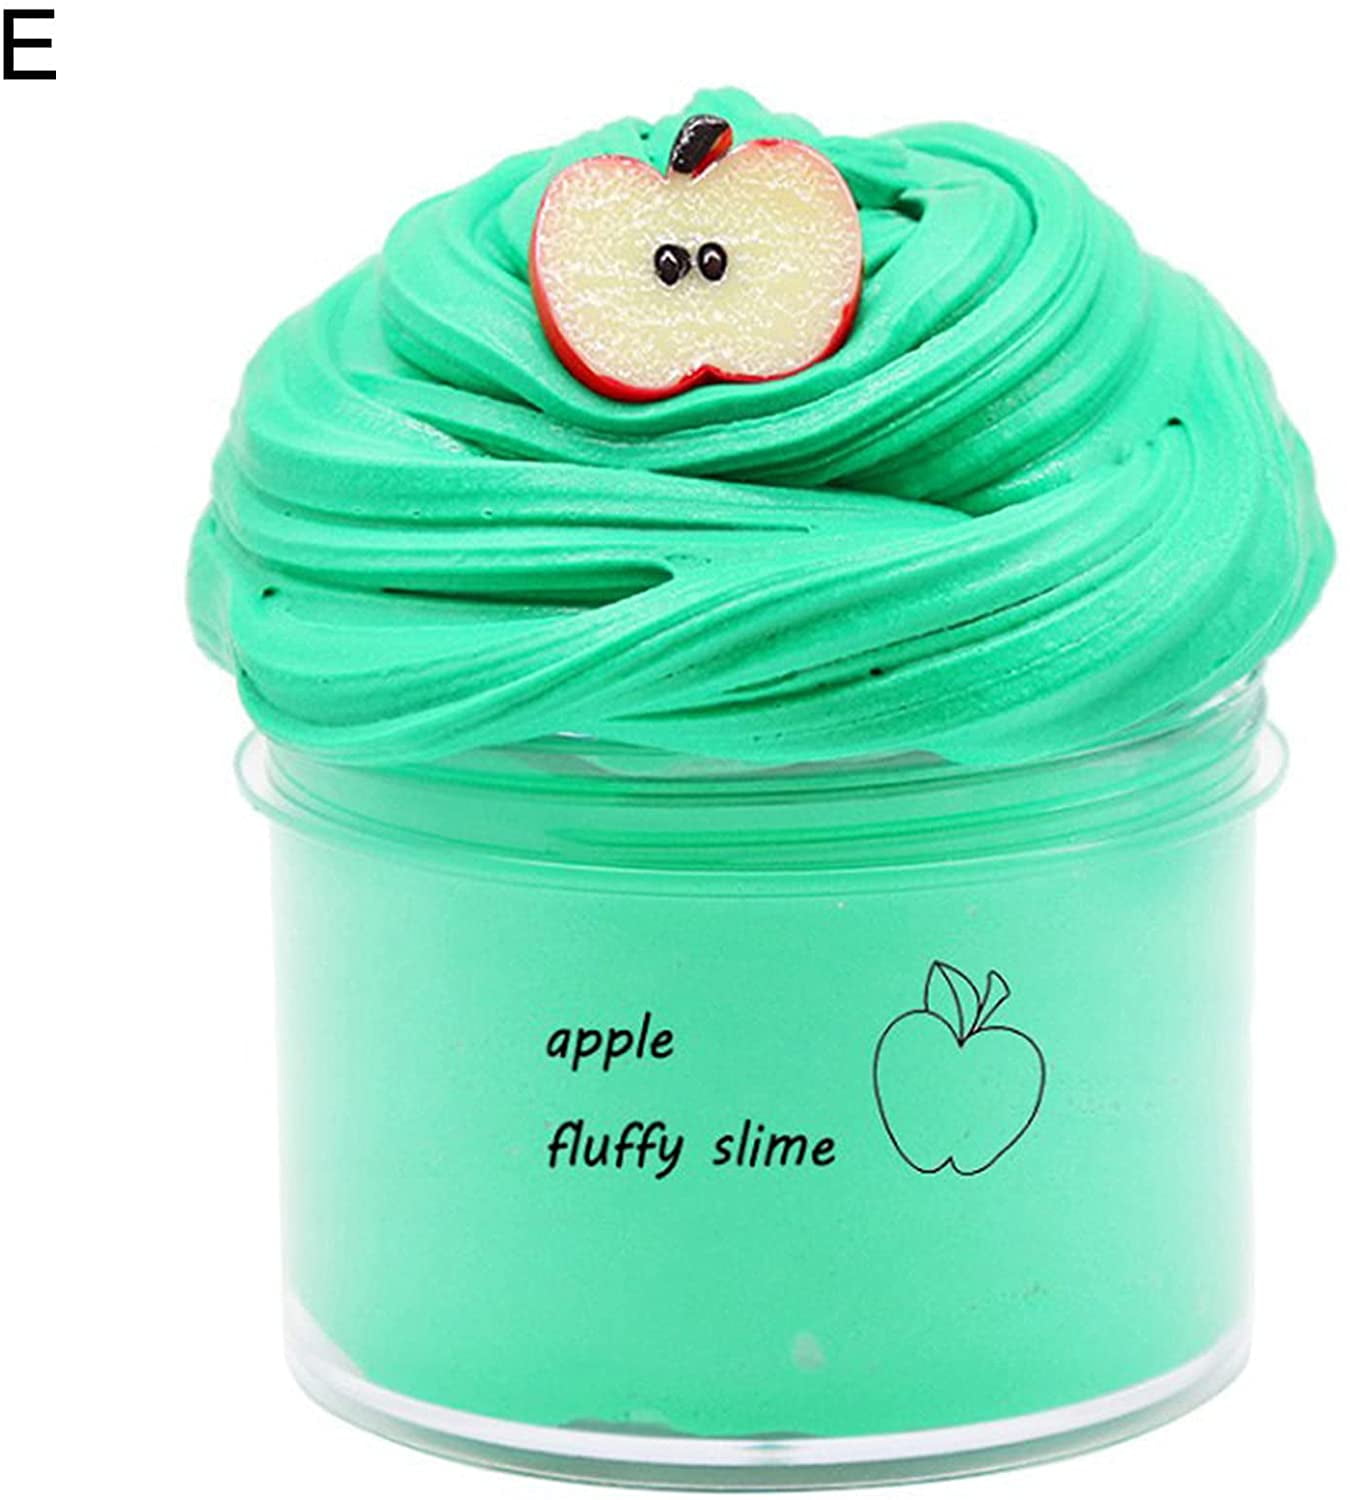 Fluffy Slime Putty for Kids Gift with 60ml Biscuit Slime Rebound Portable Display Mold Elastic Squeezing Toy for Nursery School White 